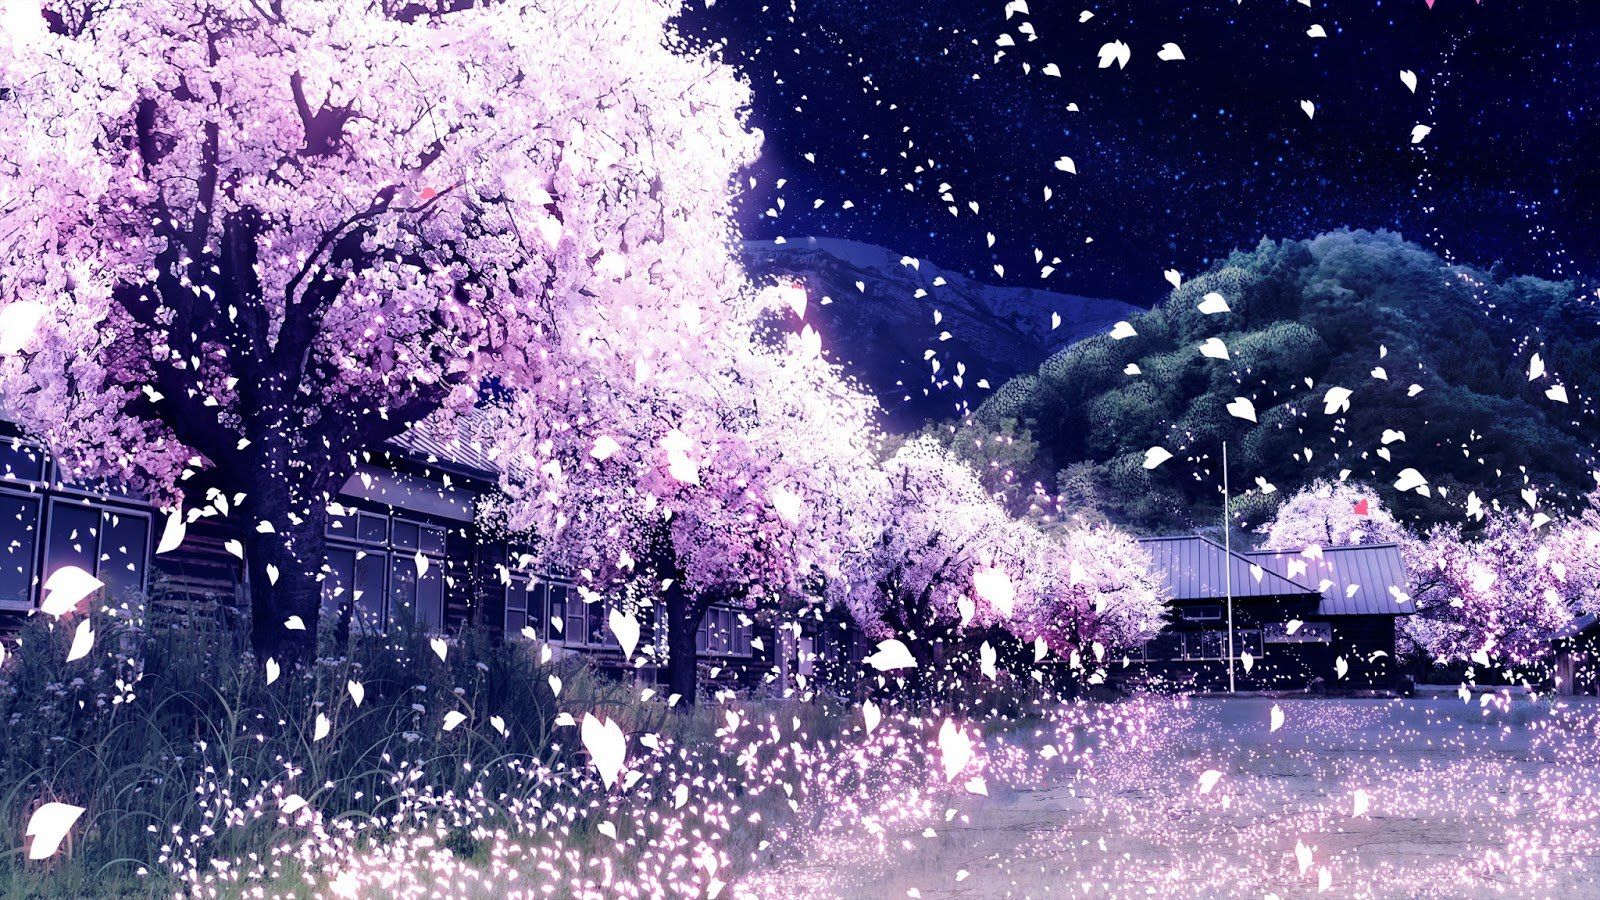 A painting of cherry blossoms in the snow - Anime landscape